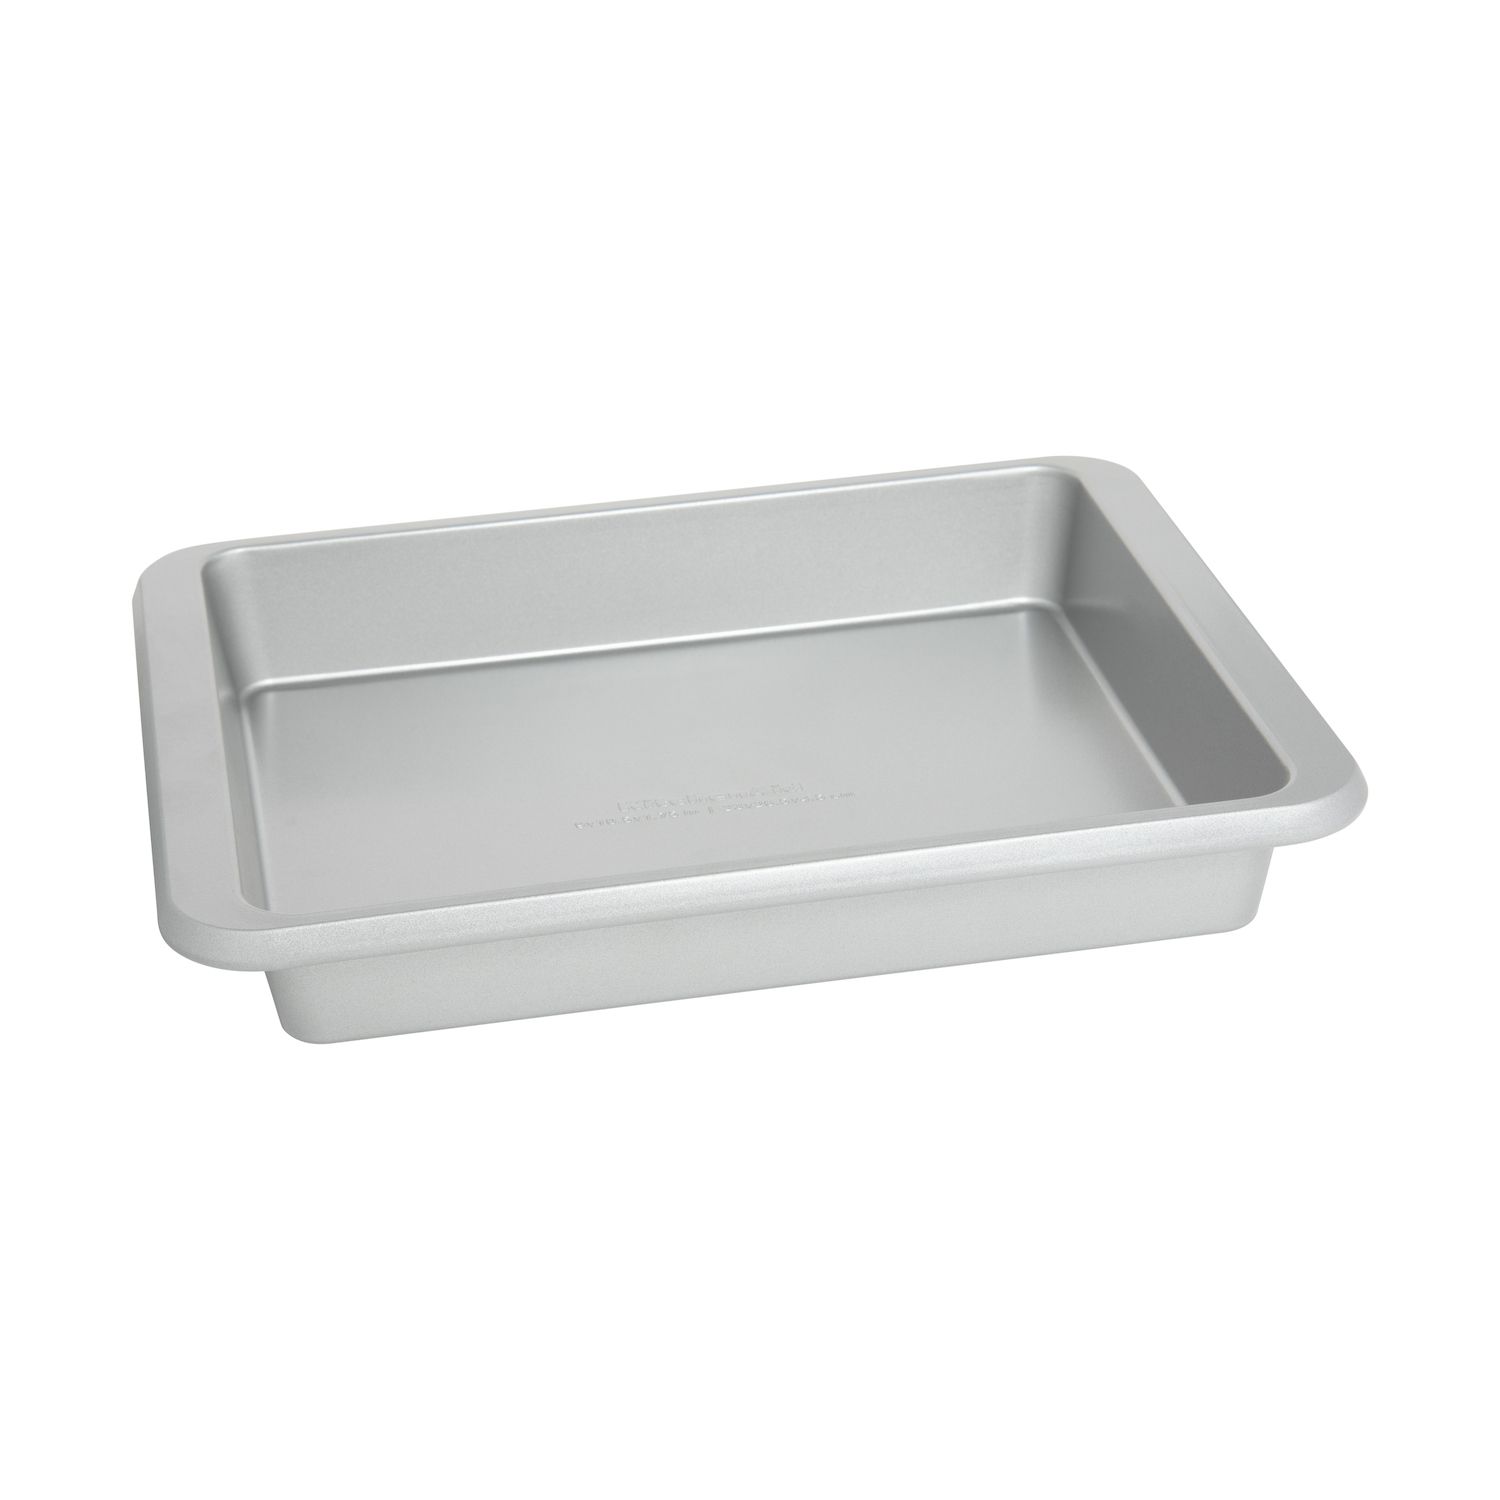 Rubbermaid DuraLite Glass Bakeware 2.5qt Glass Bakeware, Baking Dish, Cake  Pan, or Casserole Dish with Lid